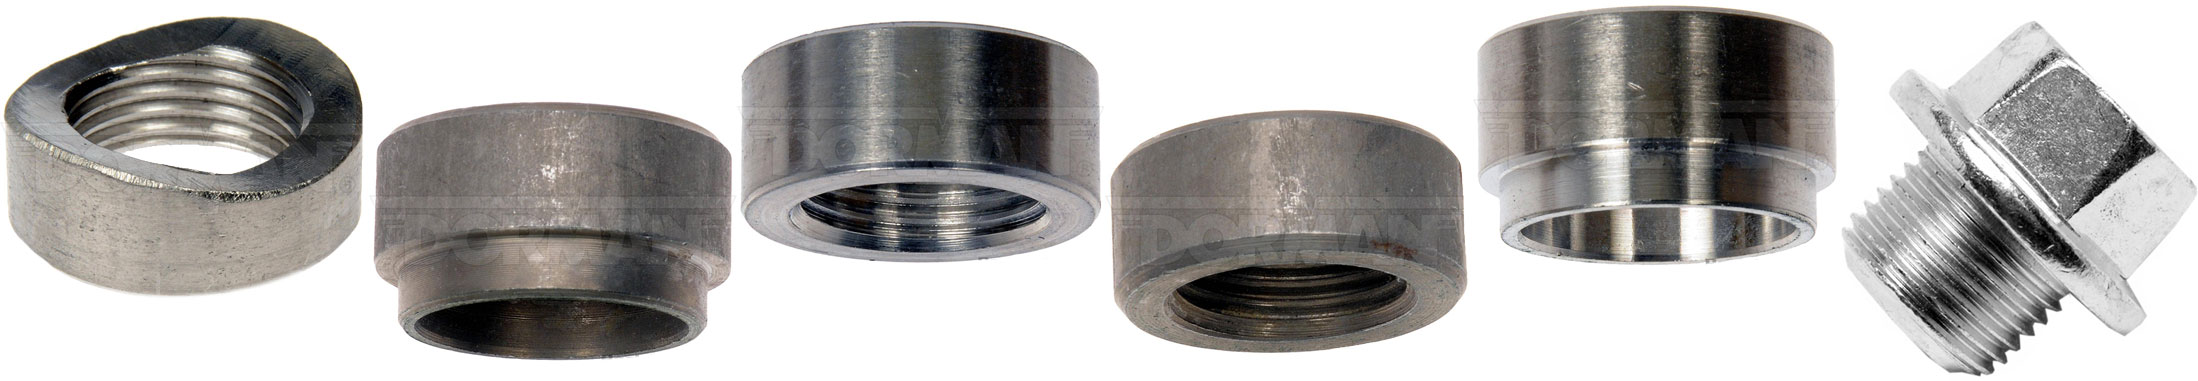 Selection of stainless steel bungs